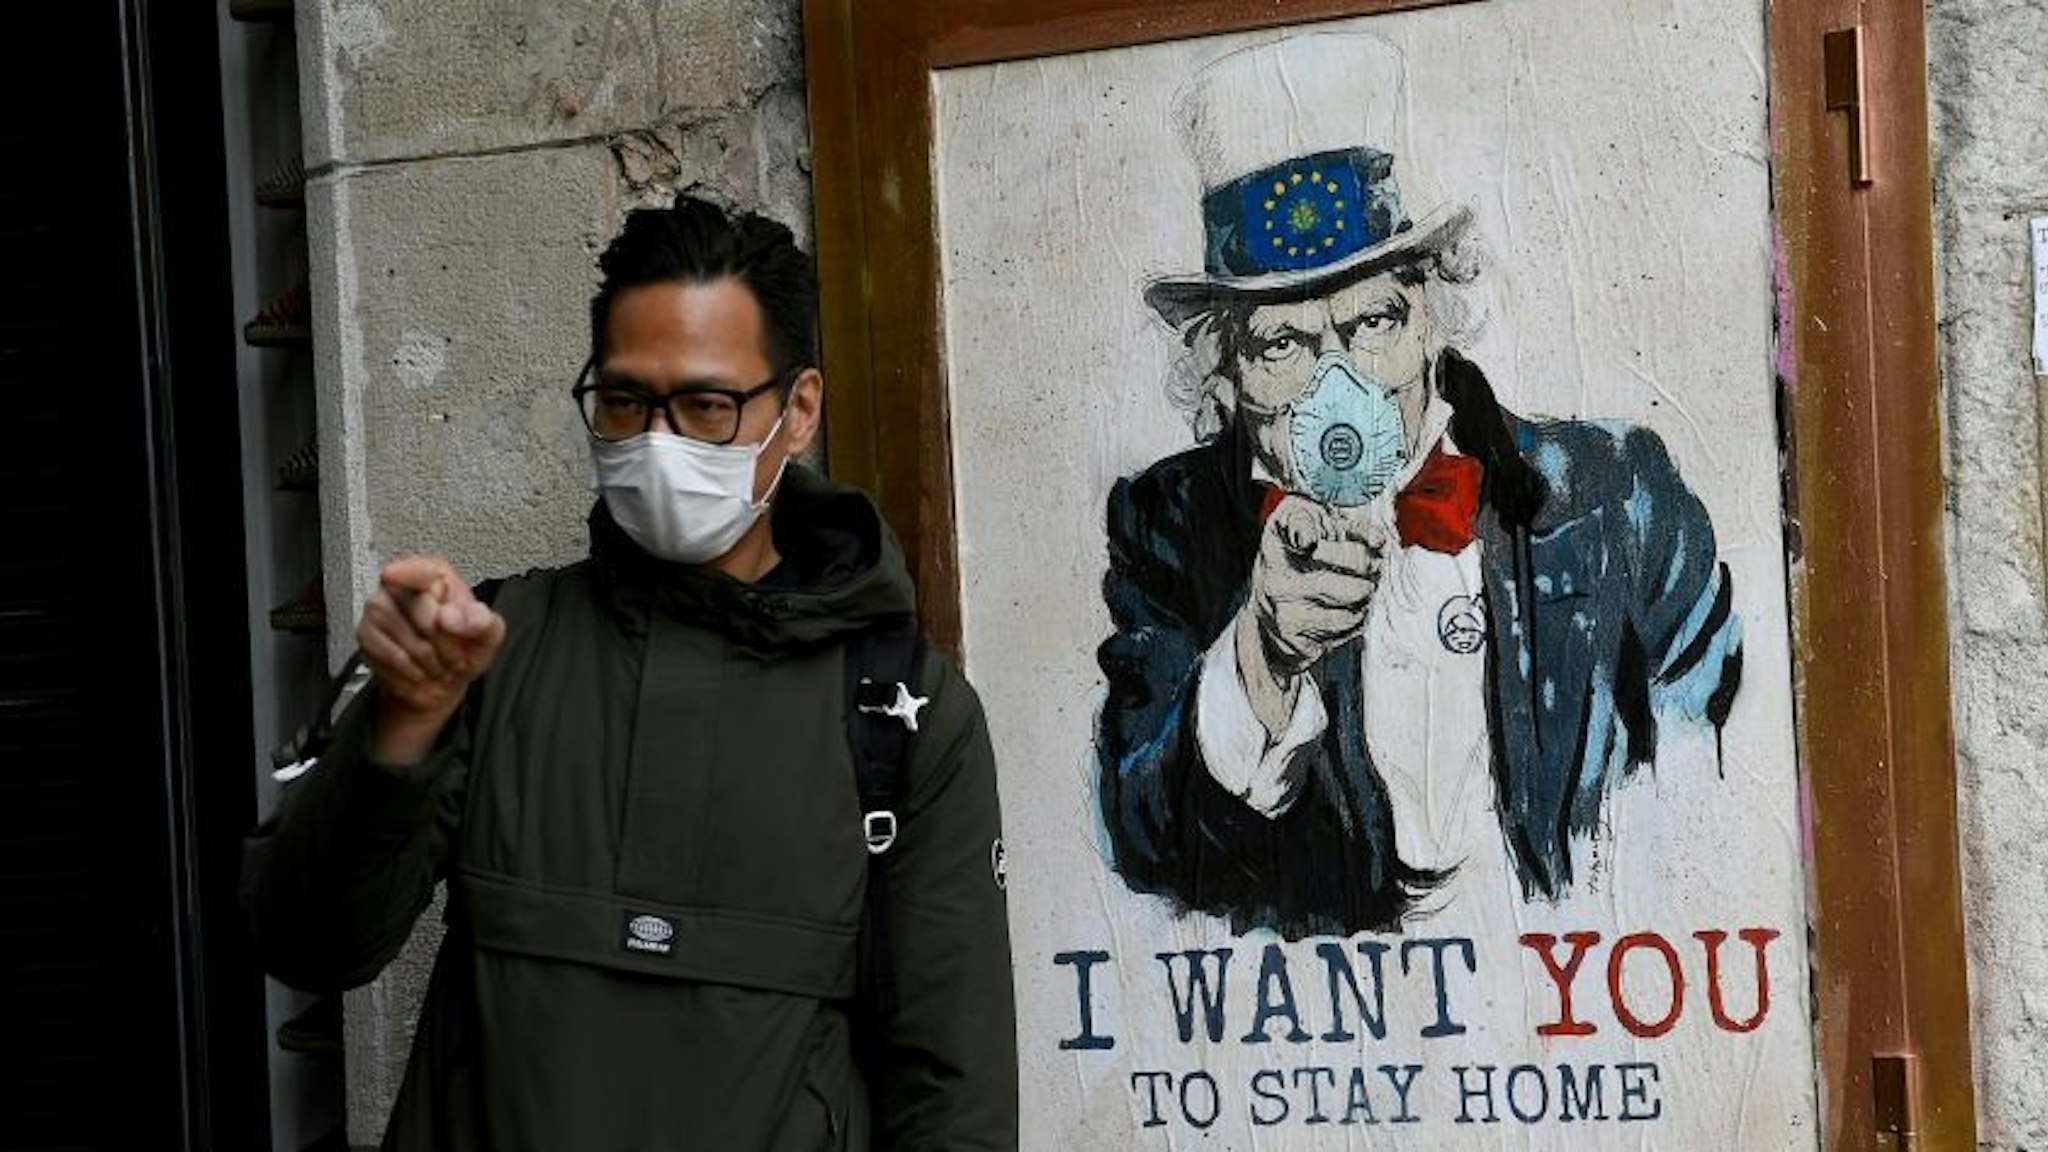 A man wearing a face mask poses with a poster by artist TVBoy featuring Uncle Sam and reading "I want you to stay home" in Barcelona on March 14, 2020 after regional authorities ordered all shops in the region be shuttered from today through March 26, save for those selling food, chemists and petrol stations, in order to slow the coronavirus spread. (Photo by Josep LAGO / AFP) / RESTRICTED TO EDITORIAL USE - MANDATORY MENTION OF THE ARTIST UPON PUBLICATION - TO ILLUSTRATE THE EVENT AS SPECIFIED IN THE CAPTION (Photo by